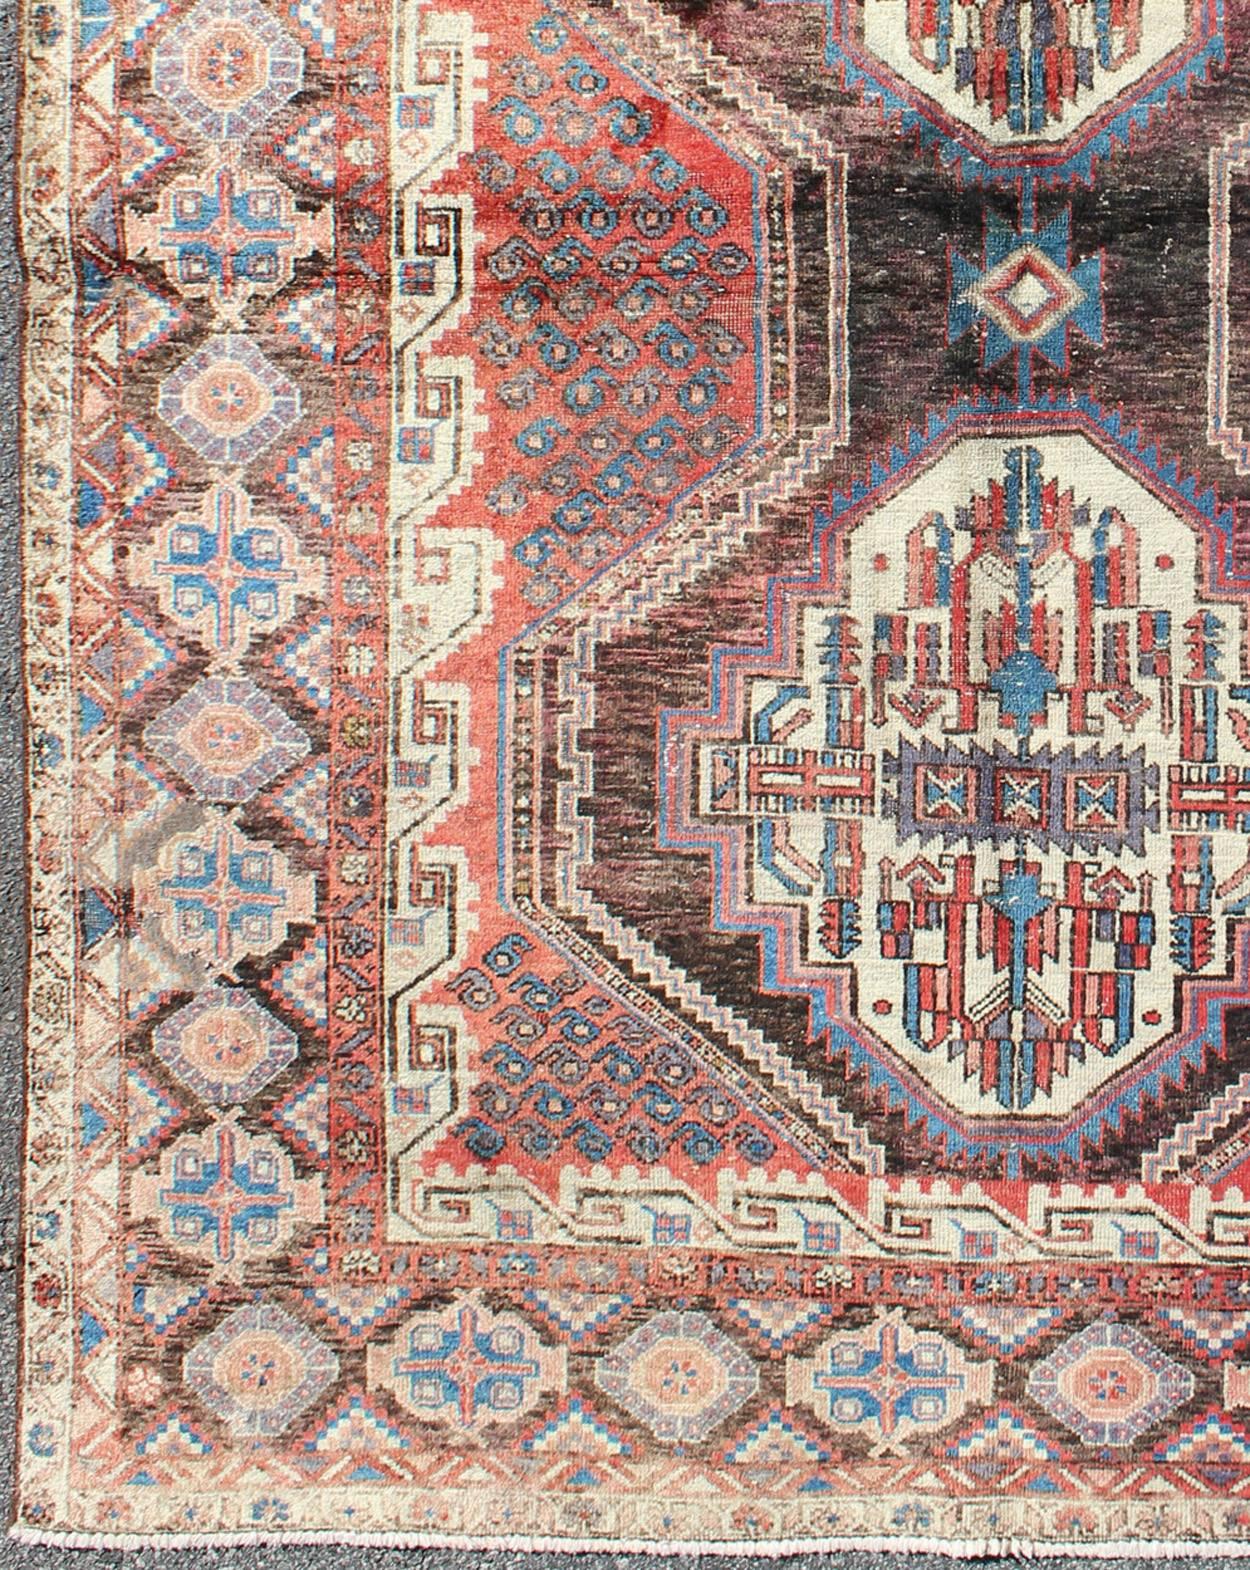 Dual medallion vintage Persian Seejan rug in red, charcoal, blue, and brown, rug tu-9902, country of origin / type: Iran / Seejan, circa mid-20th century

This vibrant Turkish Oushak carpet features a central Dual-medallion design, as well as